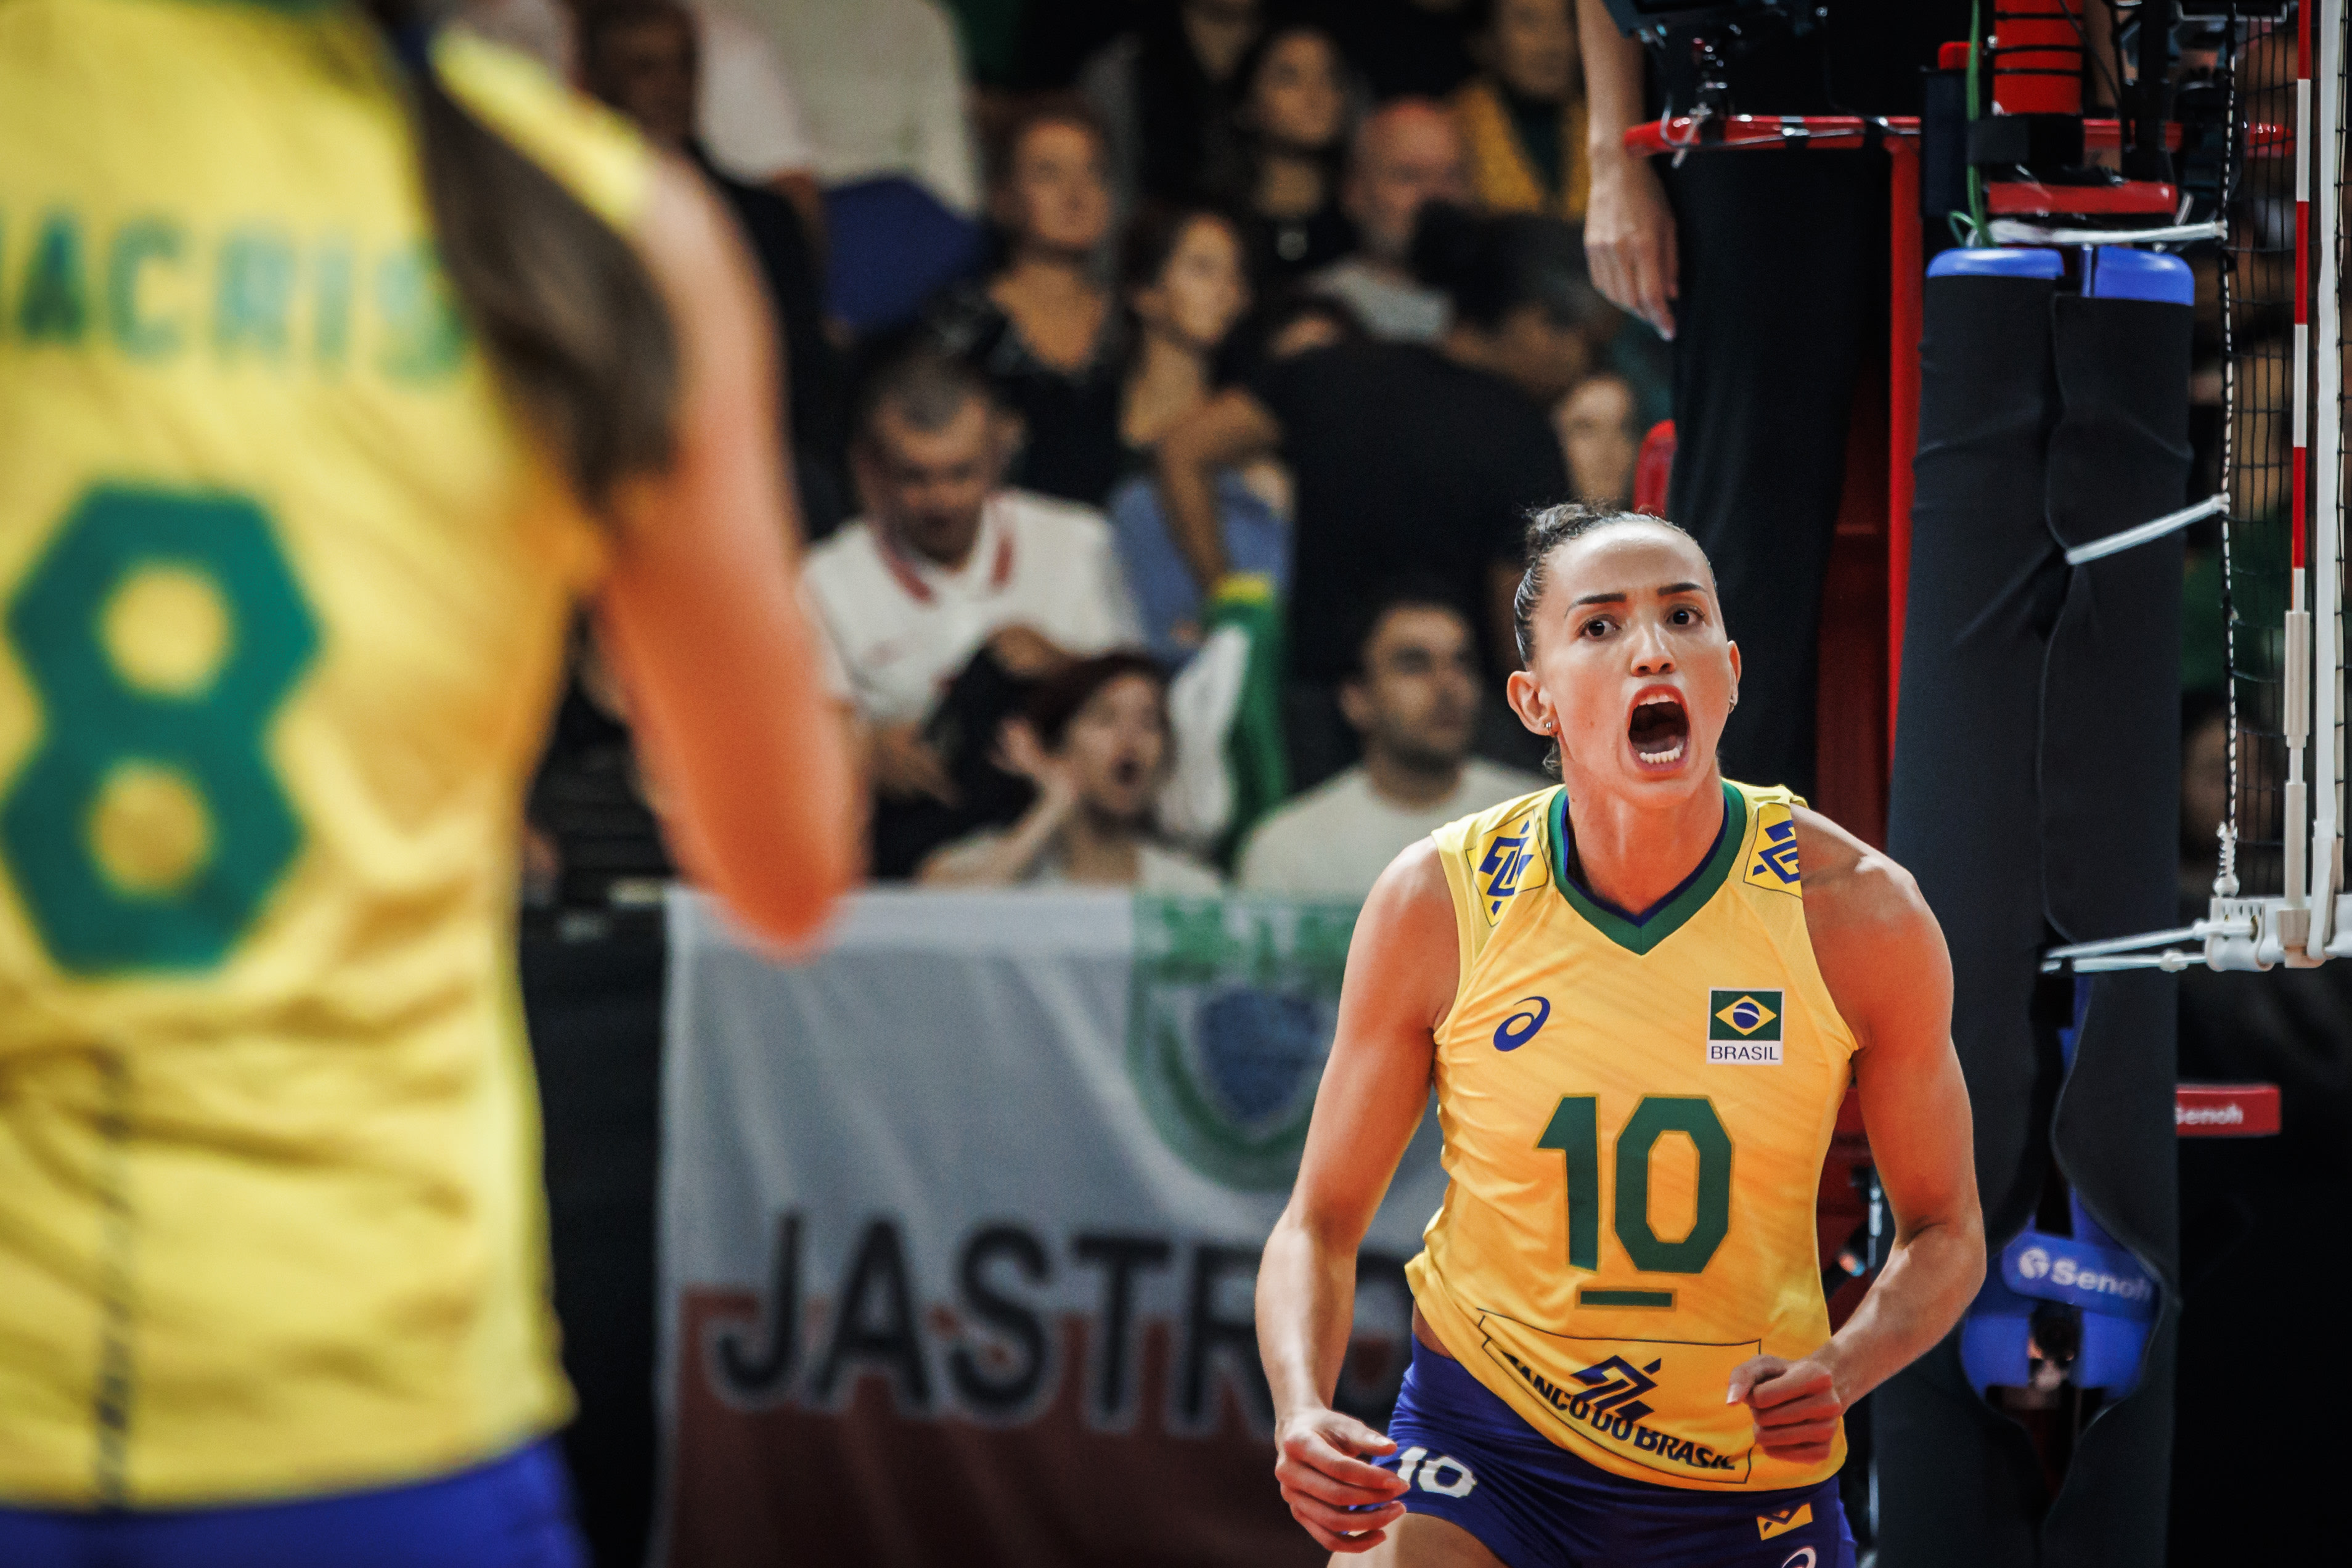 Brazil back in World Champs final after 12 years | volleyballworld.com